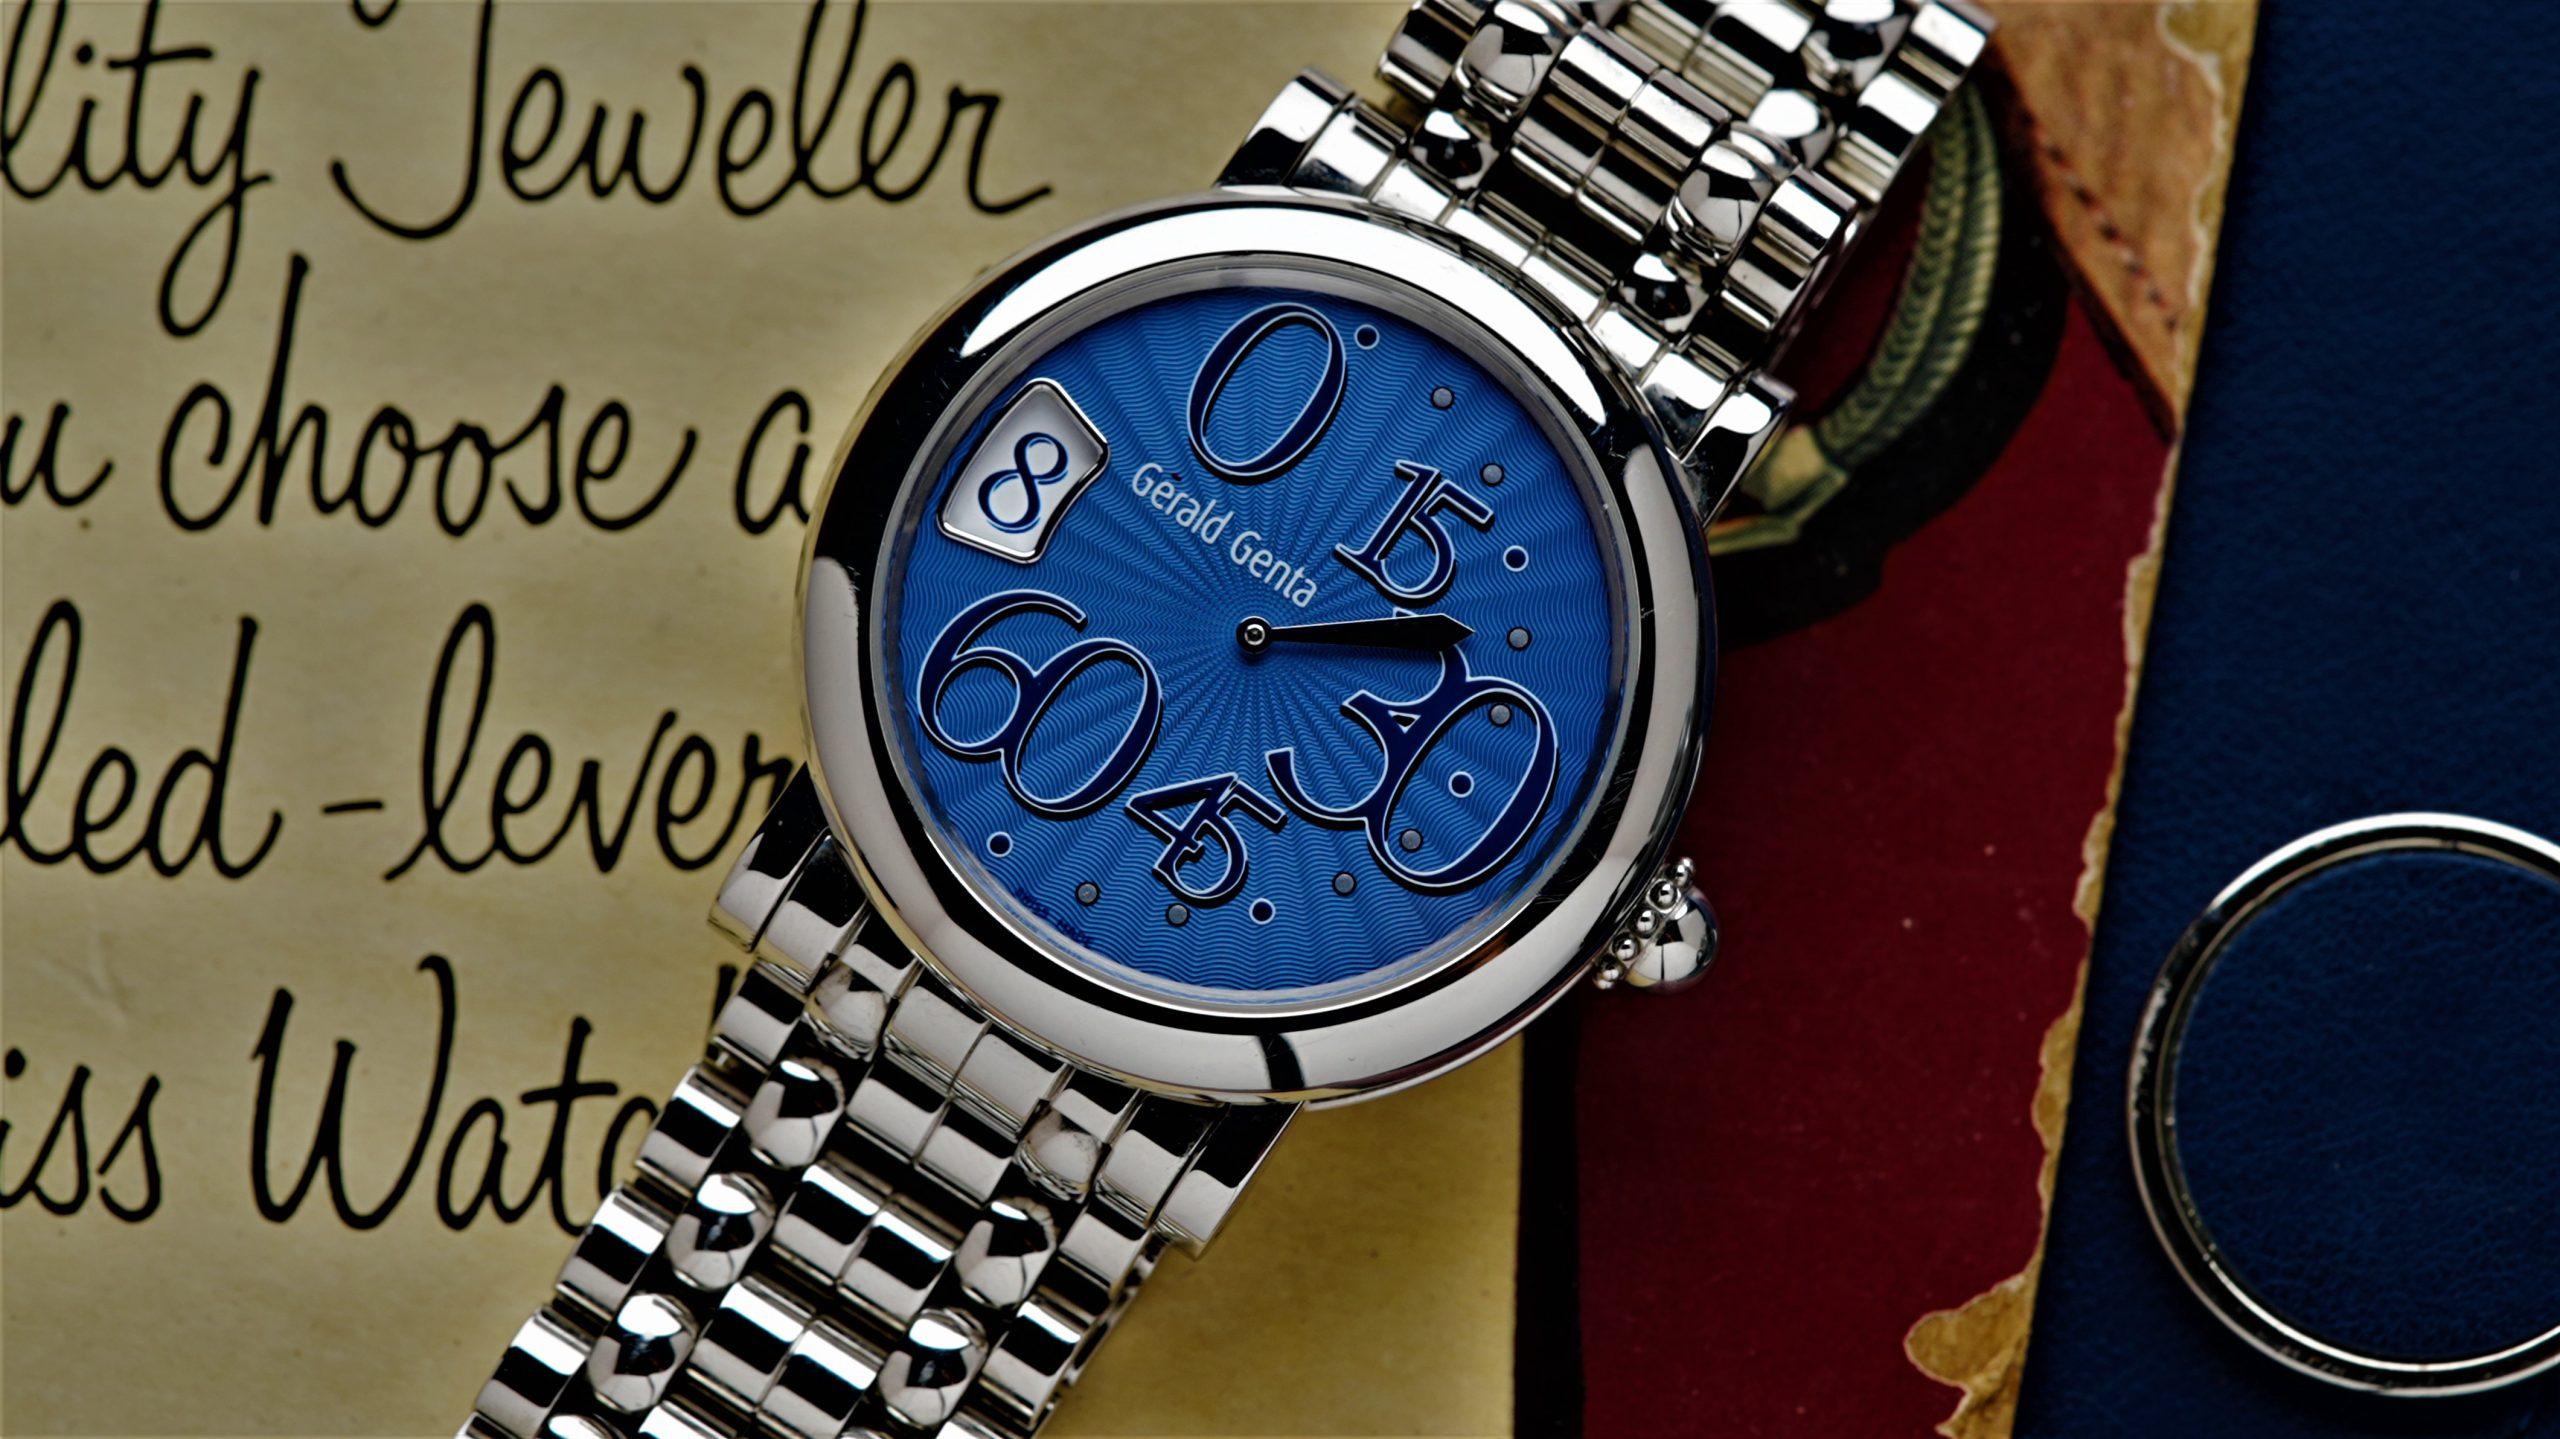 Gérald Genta Retro Classic Extremely Rare Blue Guilloche Dial Jump Hour watch pictured on an angle under white lighting.